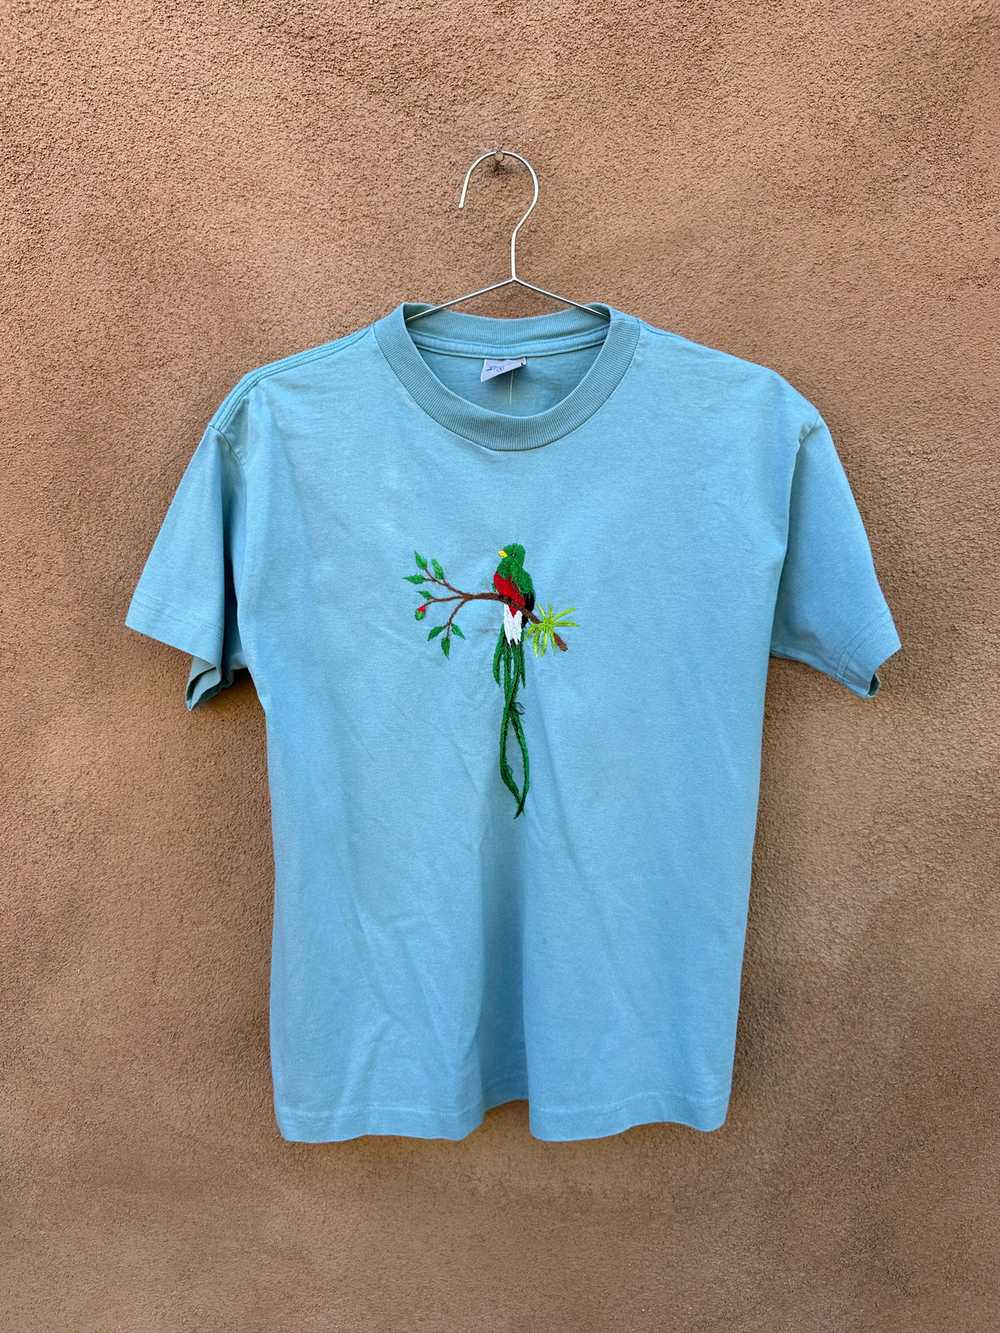 Tropical Bird Embroidered T-shirt - image 1